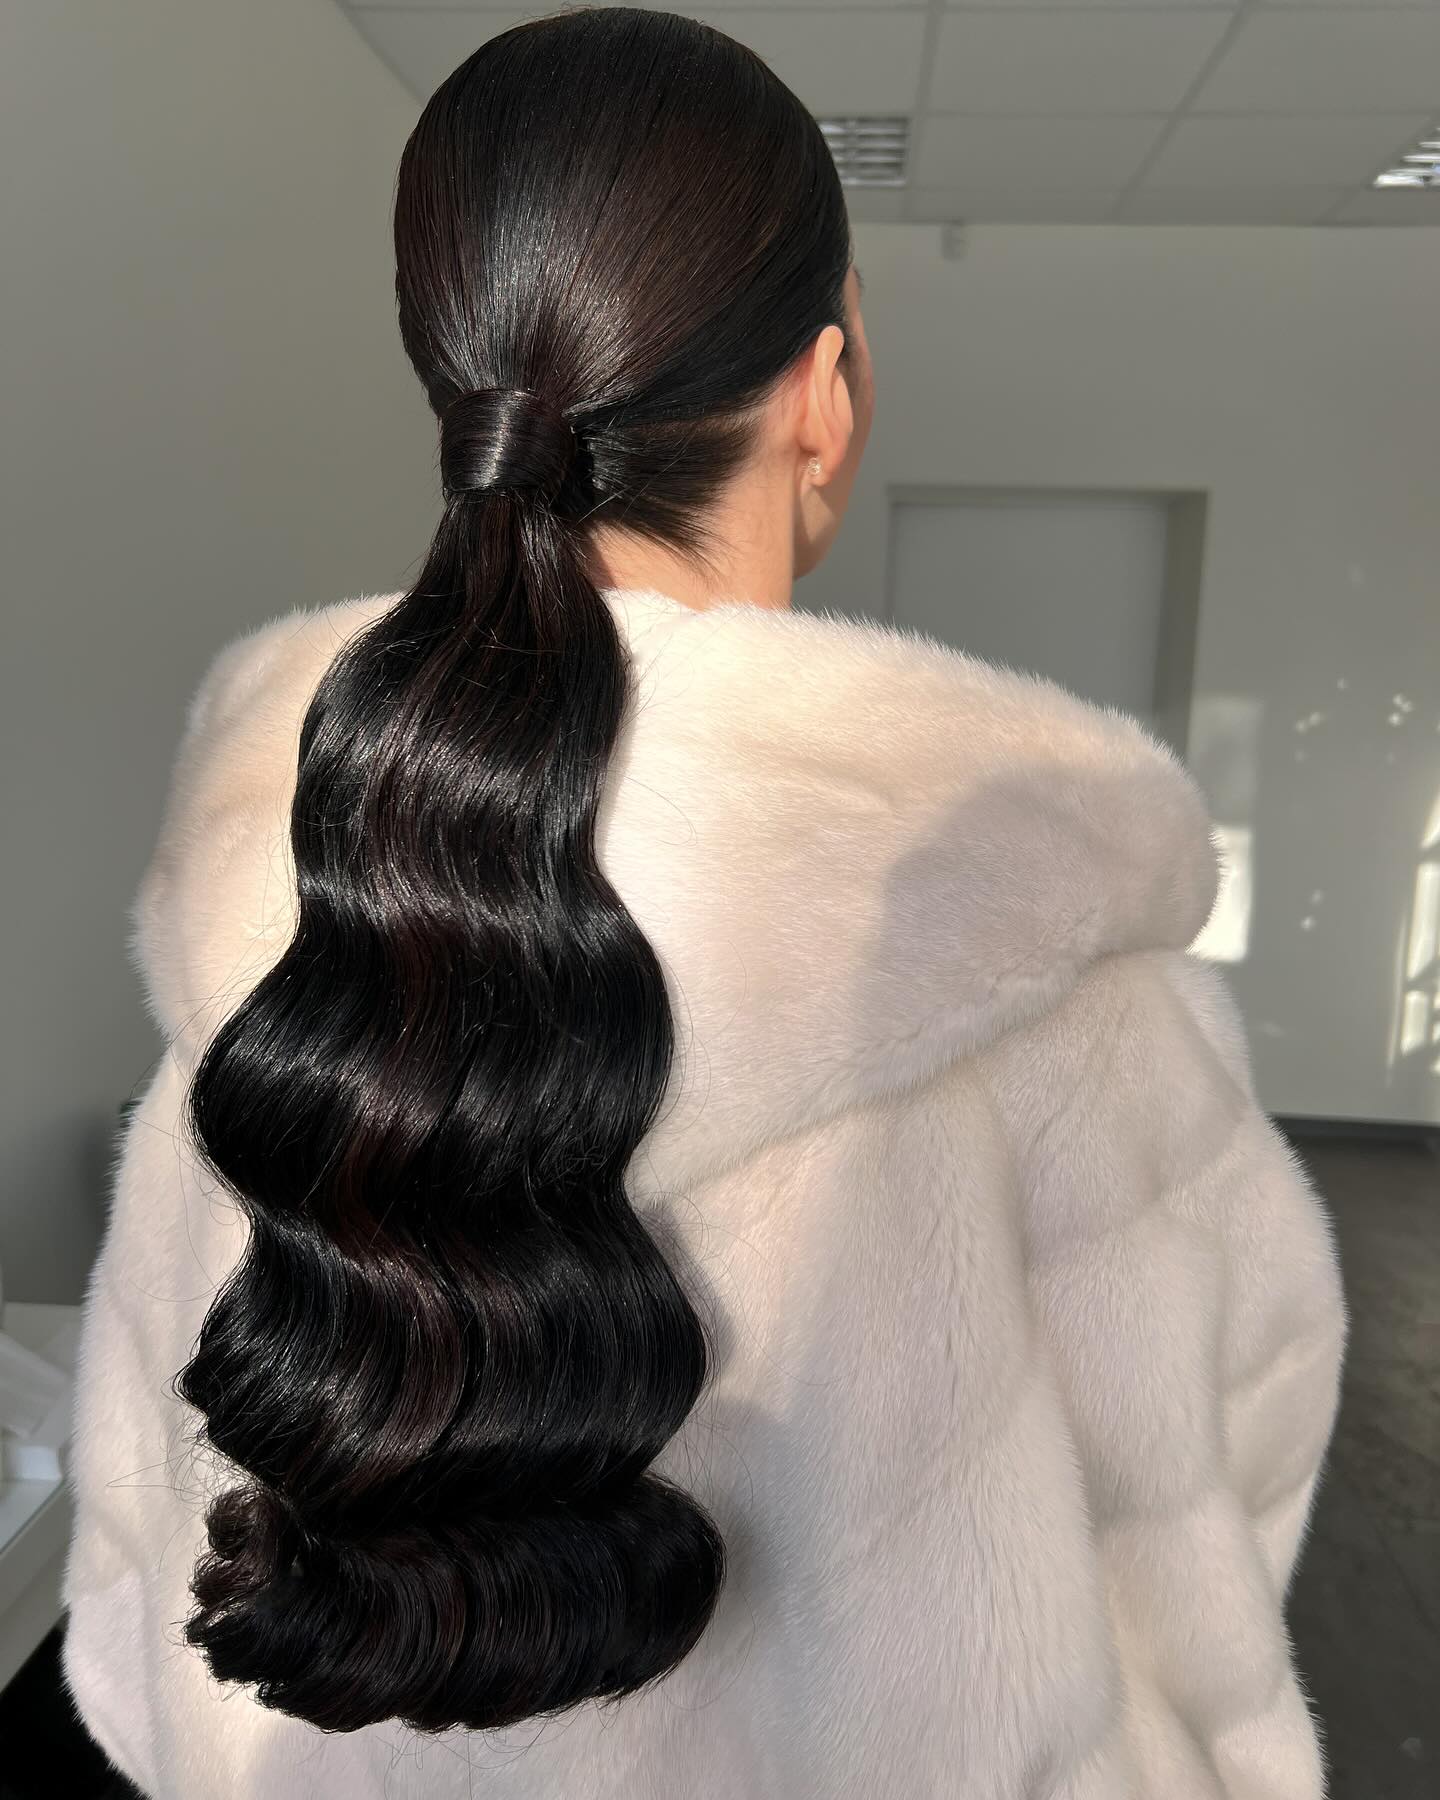 s-wave low ponytail hairstyle